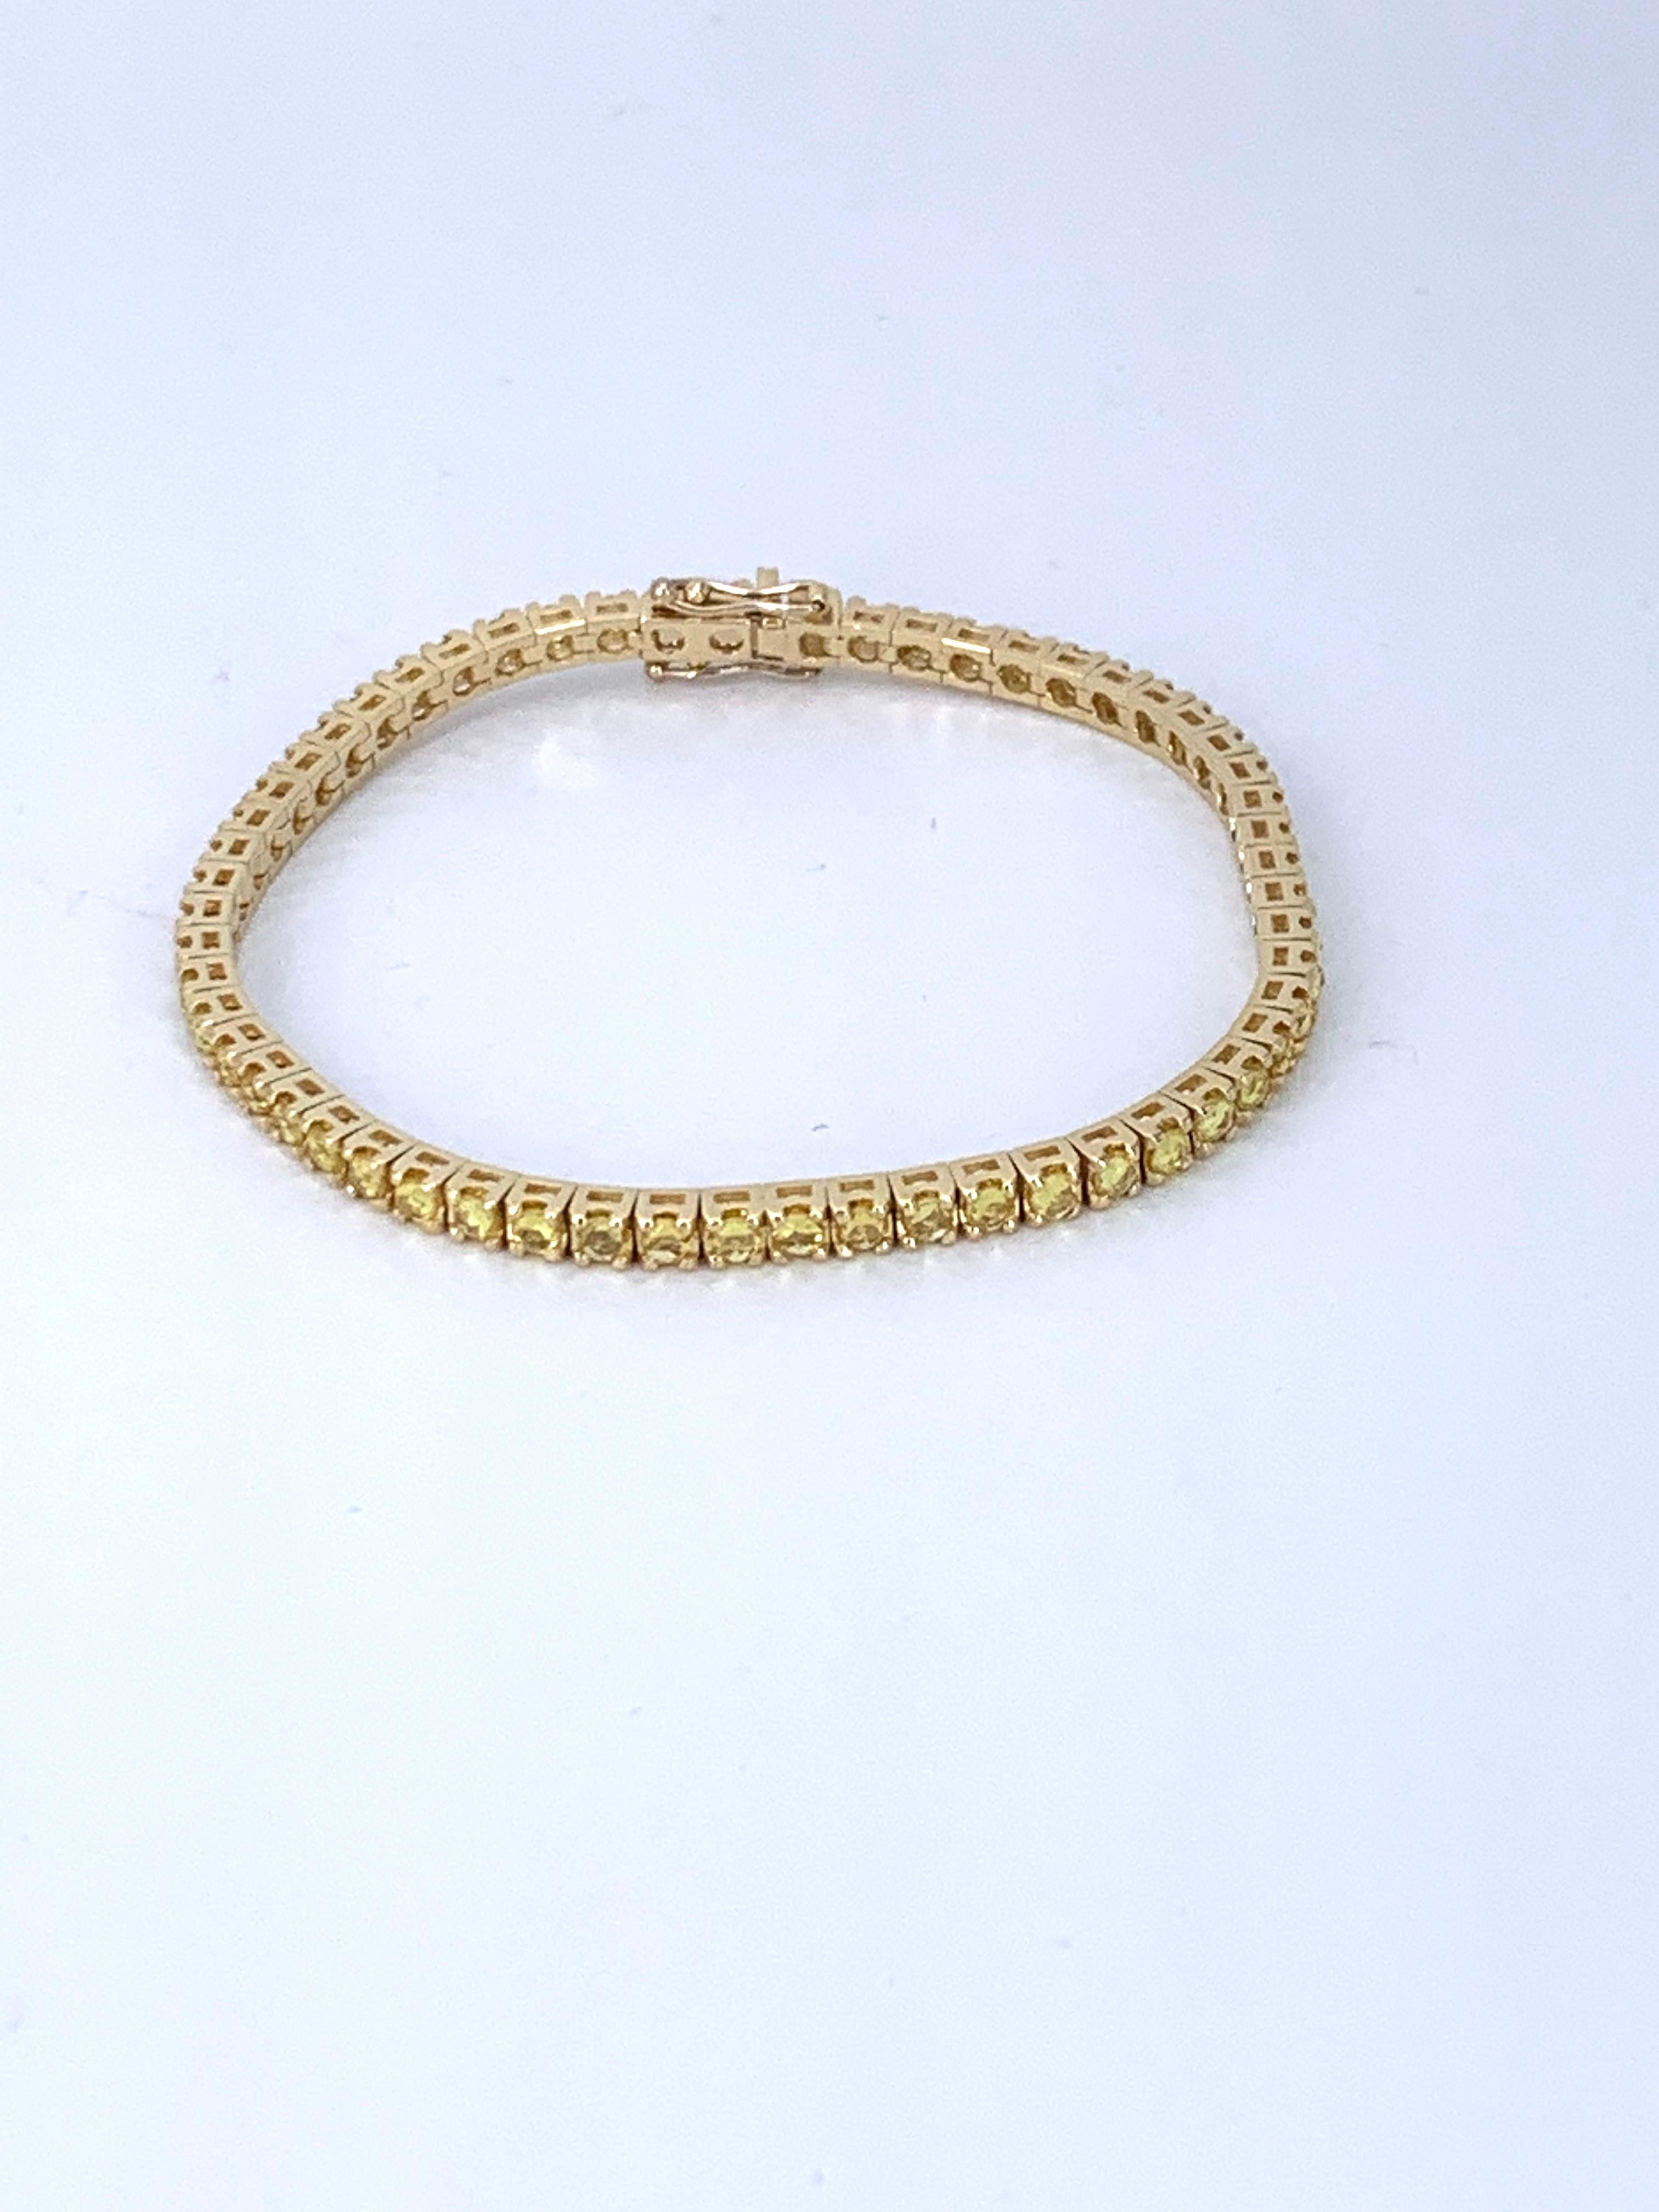 This 5.68 Carat Yellow Sapphire & 18Kt Yellow Gold Unisex Tennis Bracelet, suits any attire whatever the occasion or time of day. 

It beautifully sparkles and can be adored alone or worn stacked with other bracelets. 

Unisex it looks equally